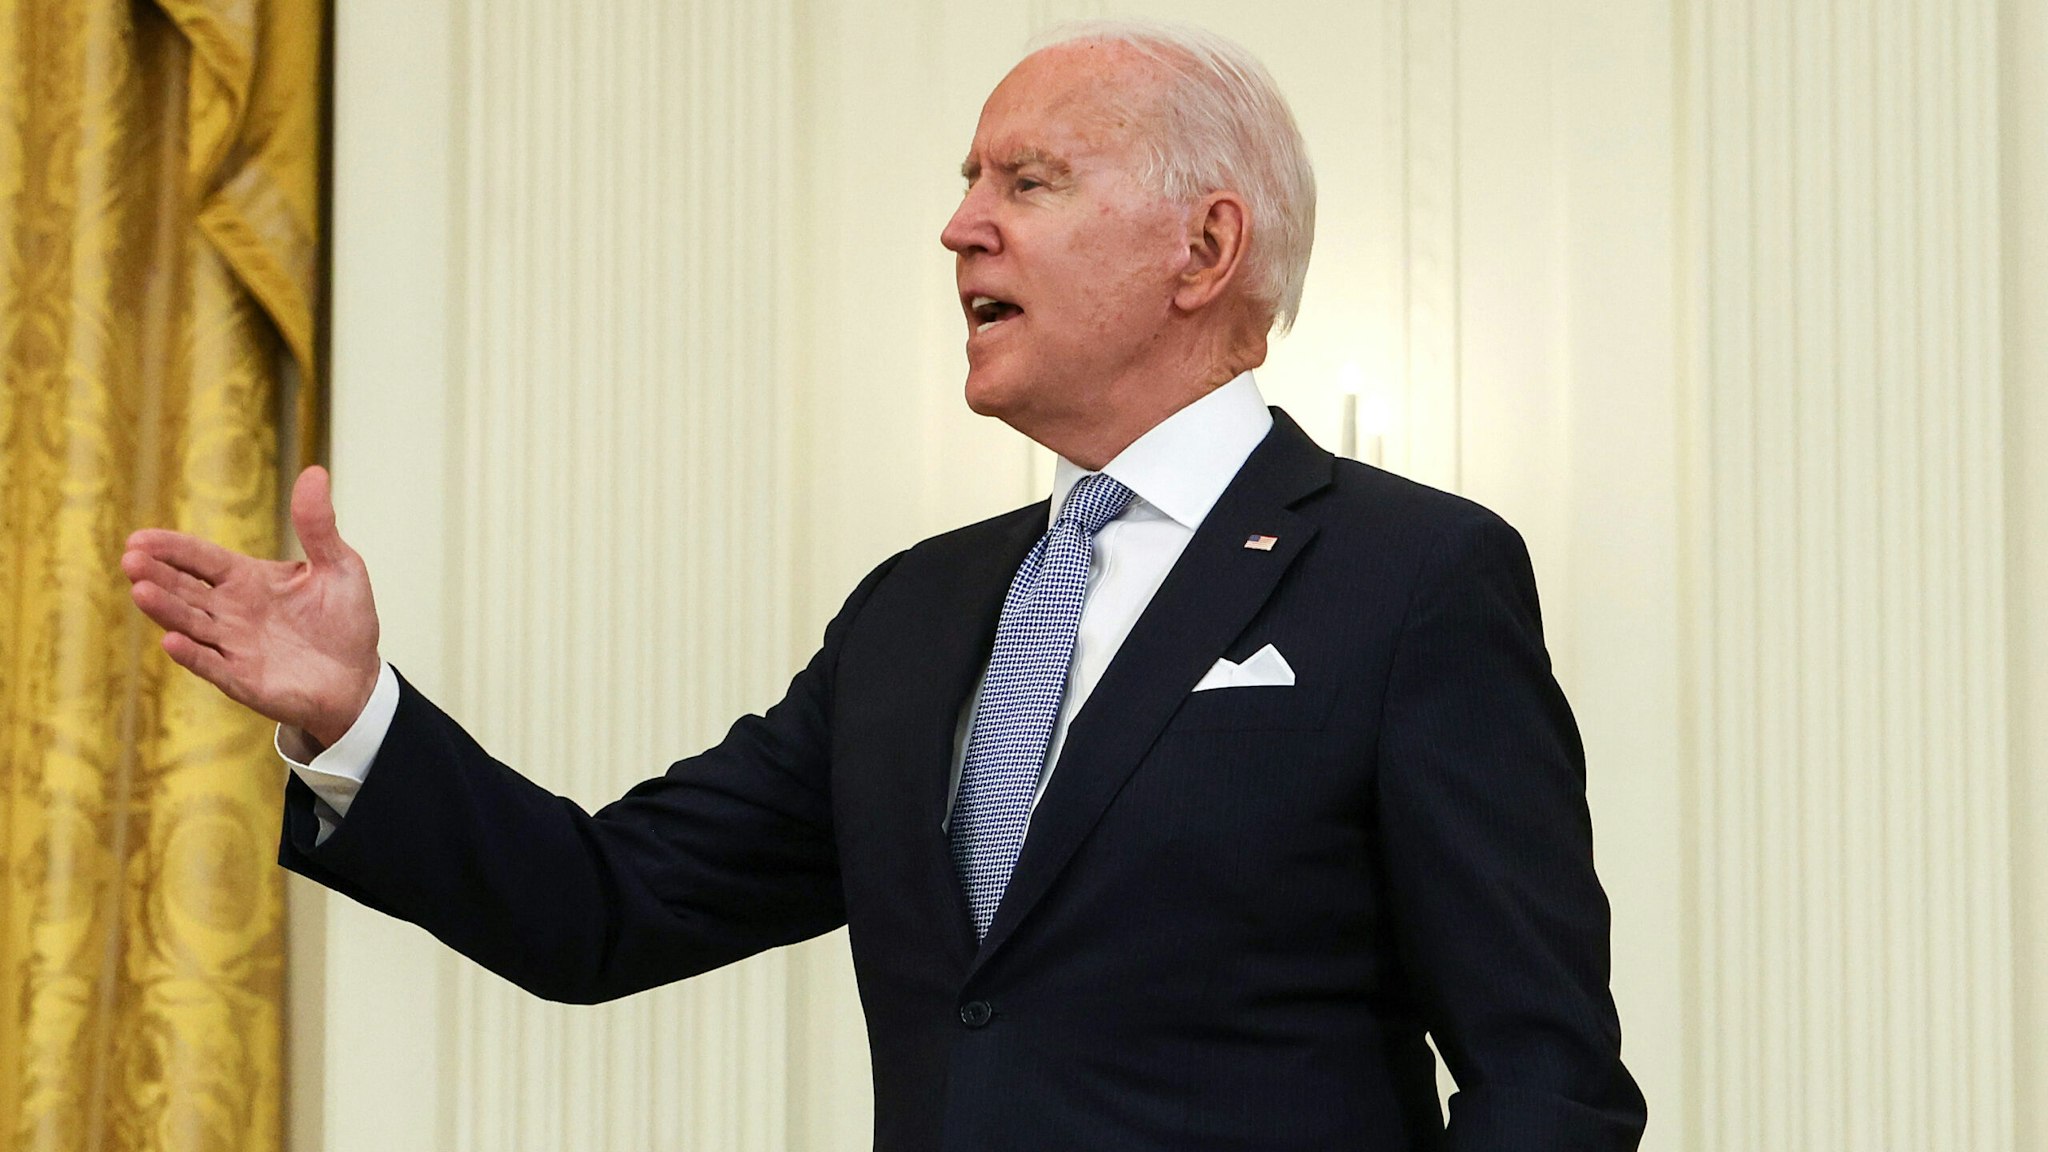 WASHINGTON, DC - JULY 29: U.S. President Joe Biden talks to reporters as he walks off stage after delivering on remarks in the East Room of the White House on July 29, 2021 in Washington, DC. President Biden spoke on his administration's effort to get more Americans vaccinated and plan to combat the spread of the Delta variant.